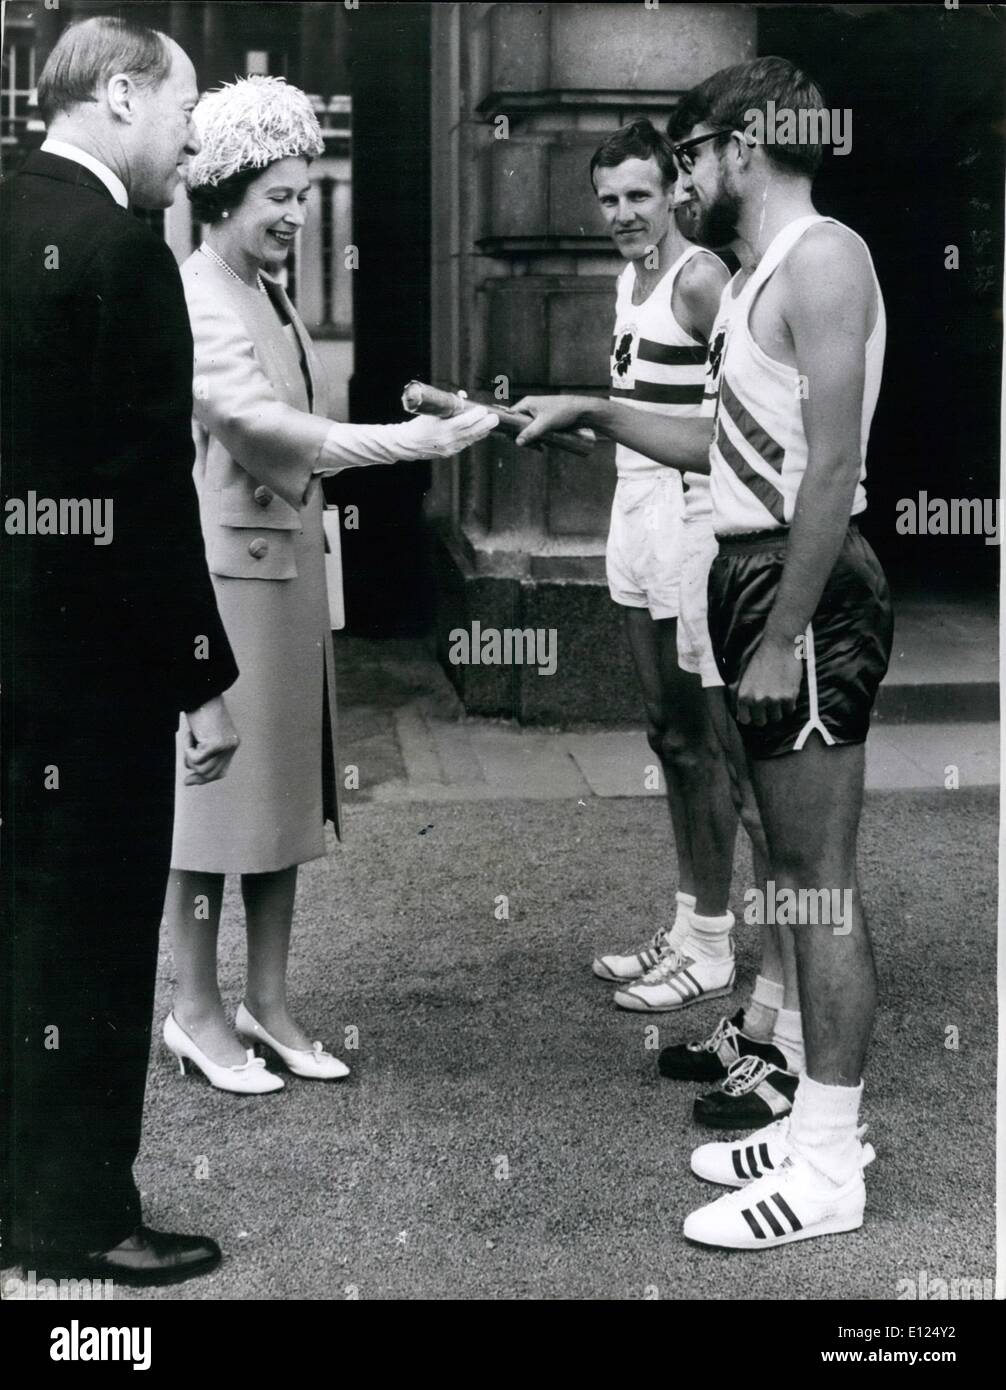 Jul. 07, 1986 - The Queen commonwealth games message leaves: At a ceremony in the forecourt of Buckingham Palace, London, this morning, H.M. The Queen handed her special message, contained in a baton, to three athletes who were carrying it on the first stage of a relay that will culminate in Jamaica, where the 8th British Empire and Commonwealth Games are being held. The relay will carry the message to London Airport from where it will be flown by BOAC aircraft to the West Indies. Photo shows H.M Stock Photo